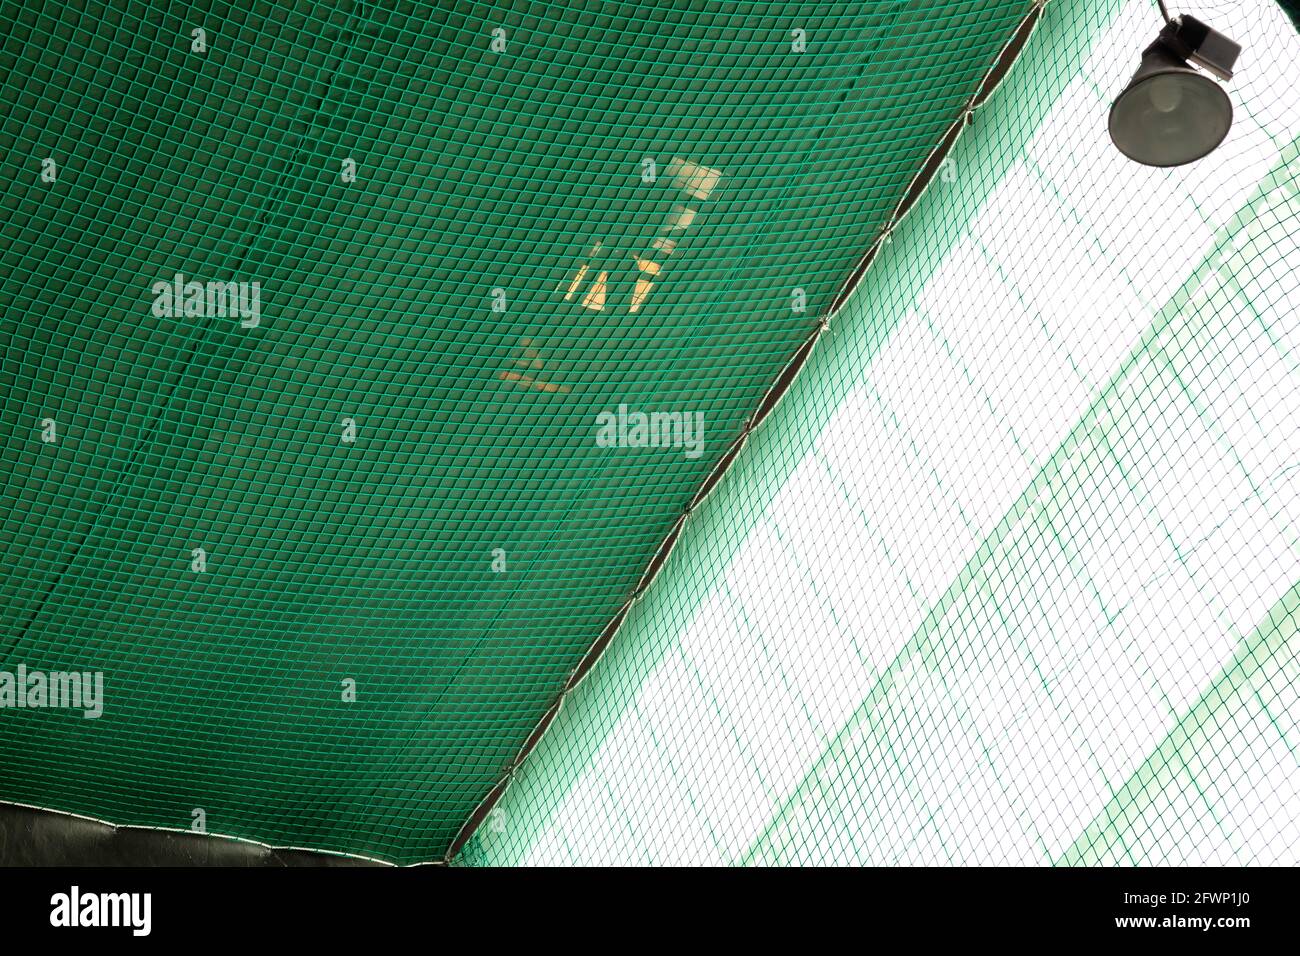 a regulatory safety net of color green, placed under roof to prevent the risk of falls during the works Stock Photo